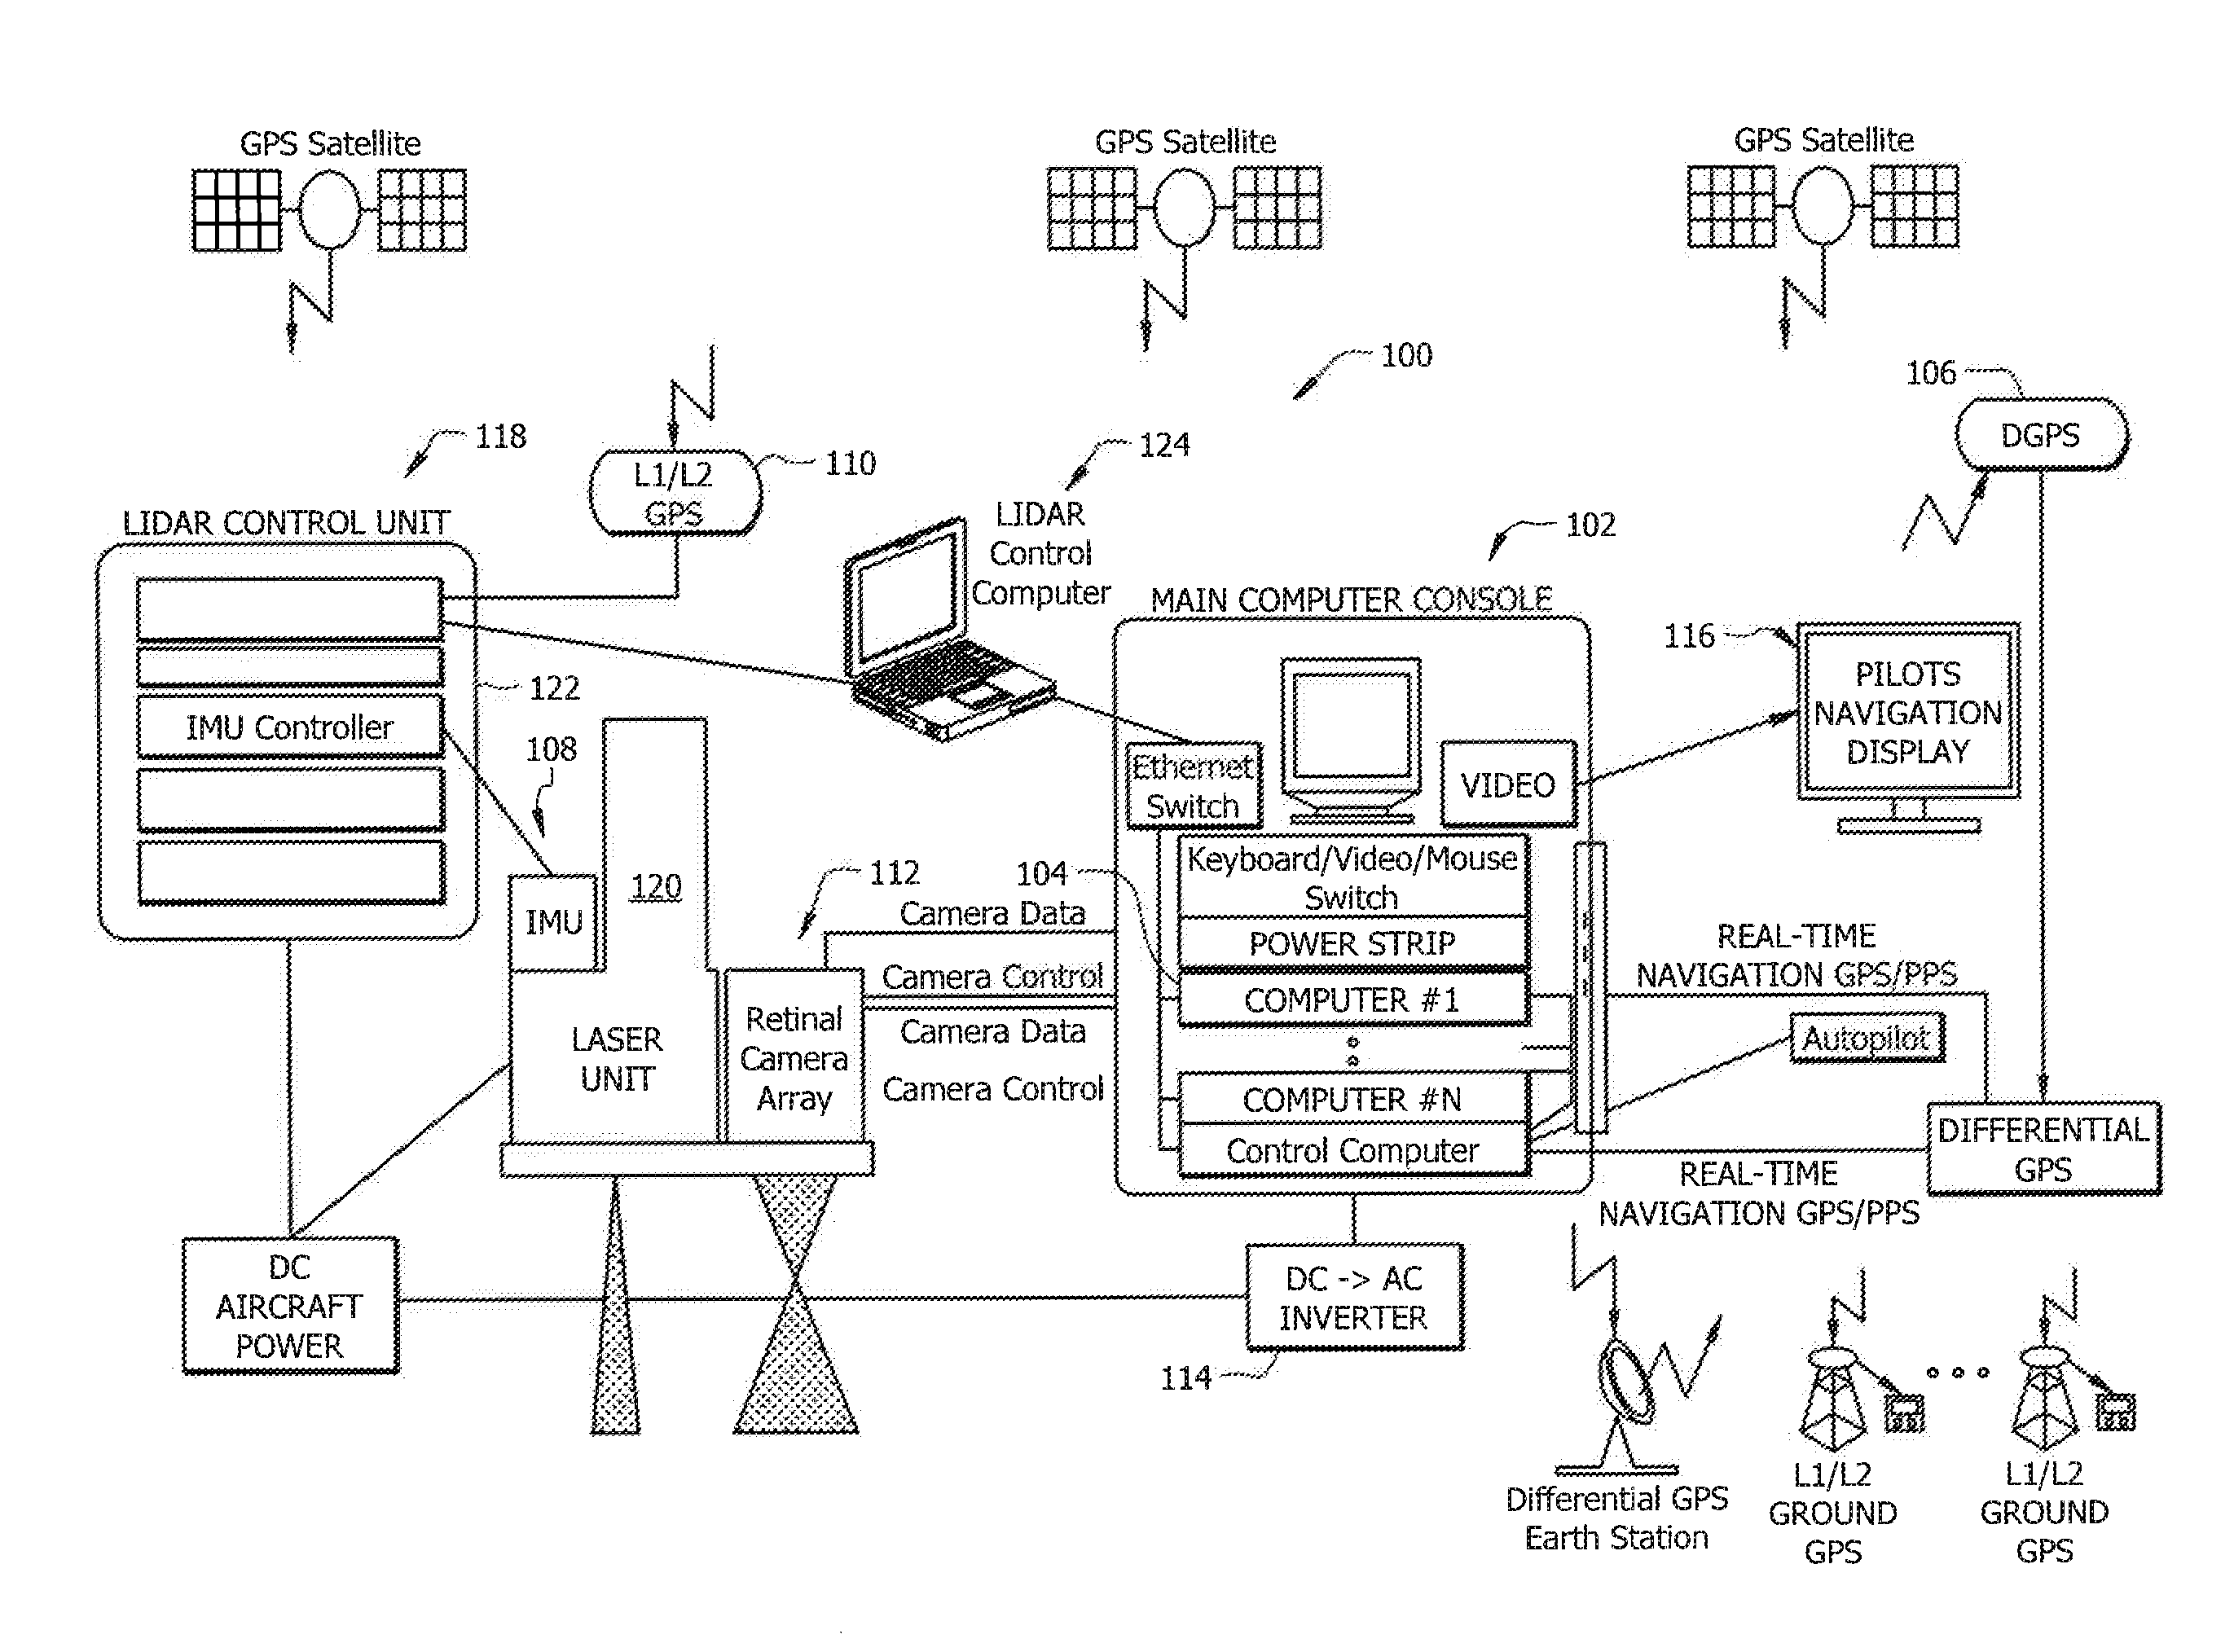 Self-calibrated, remote imaging and data processing system